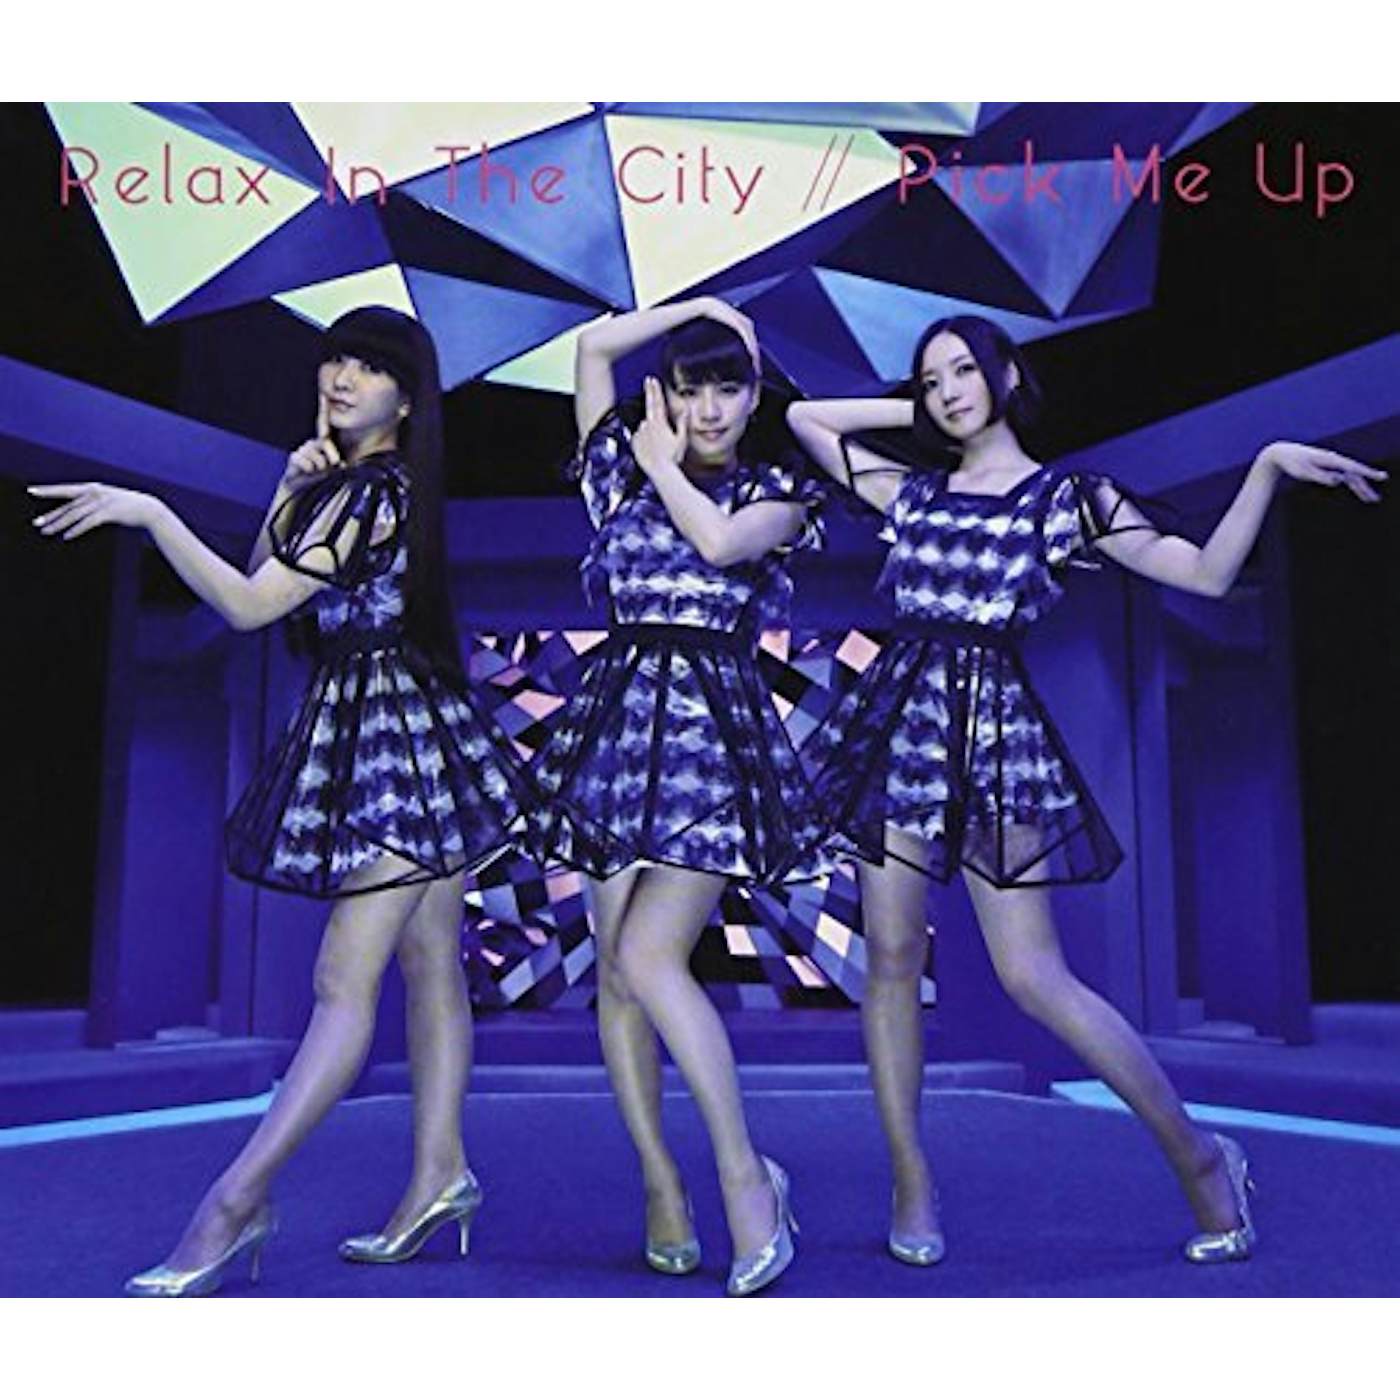 Perfume RELAX IN THE CITY / PICK ME UP CD